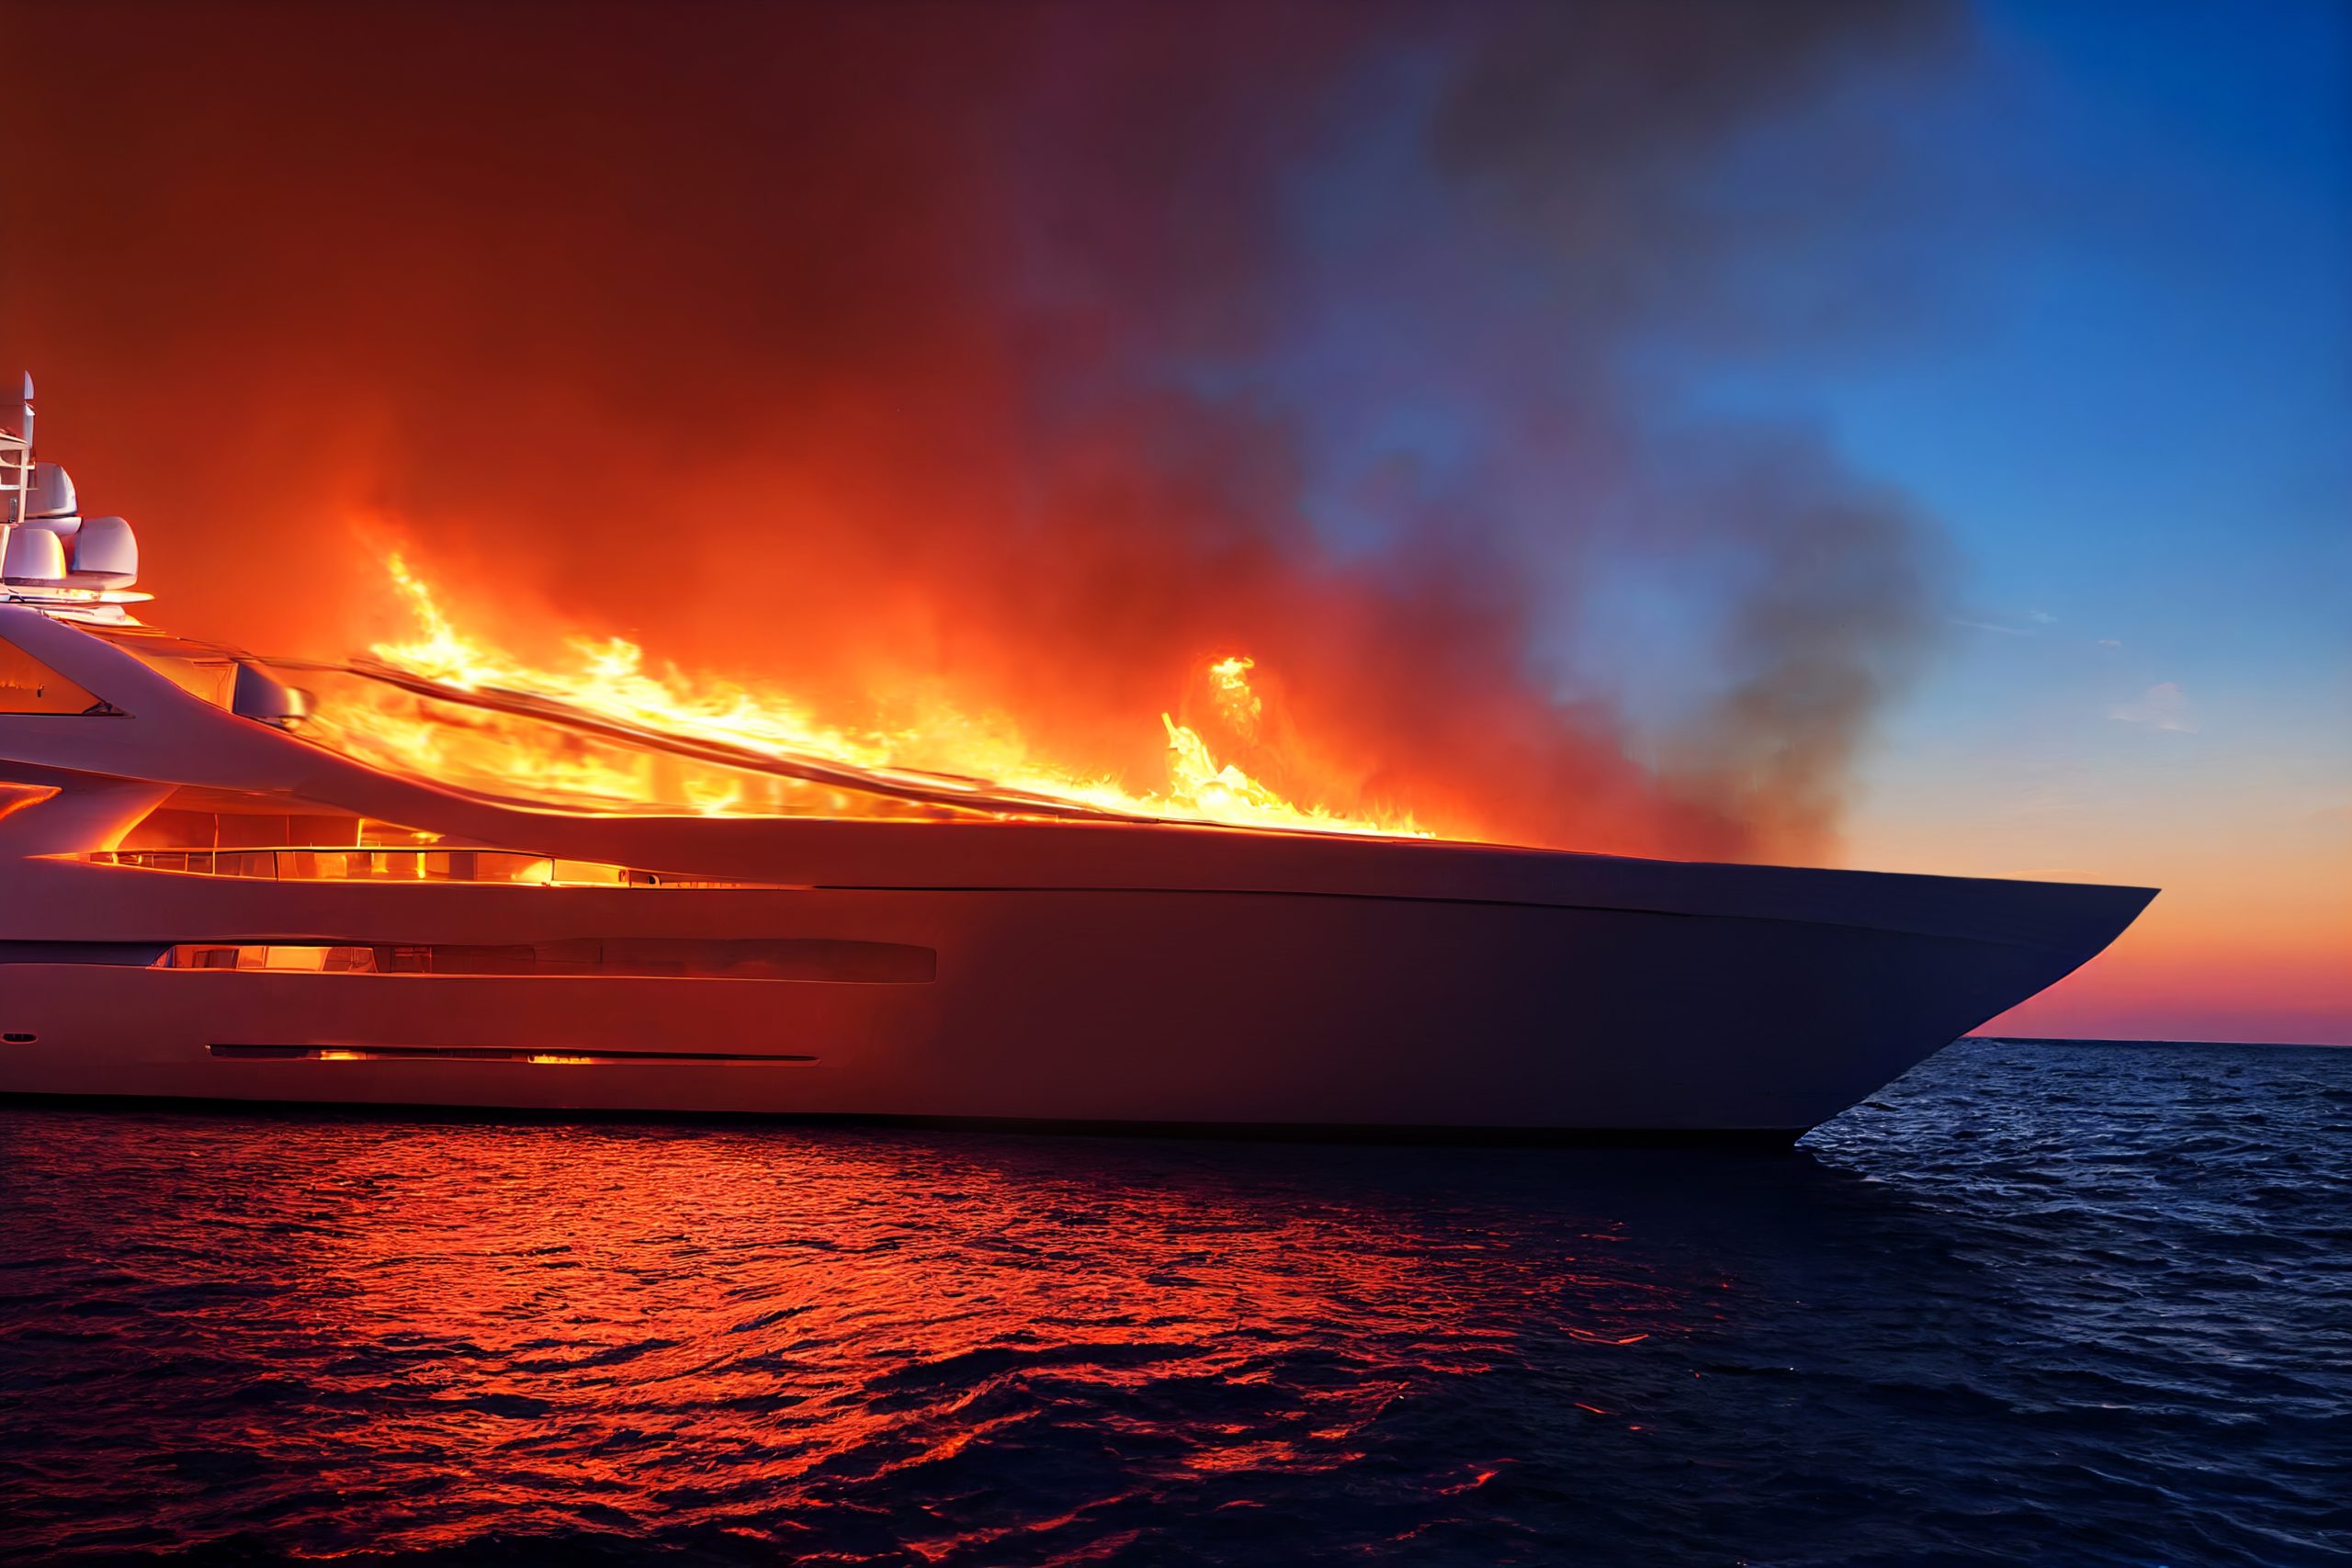 superyacht that is engulfed in flames on a sunset backdrop